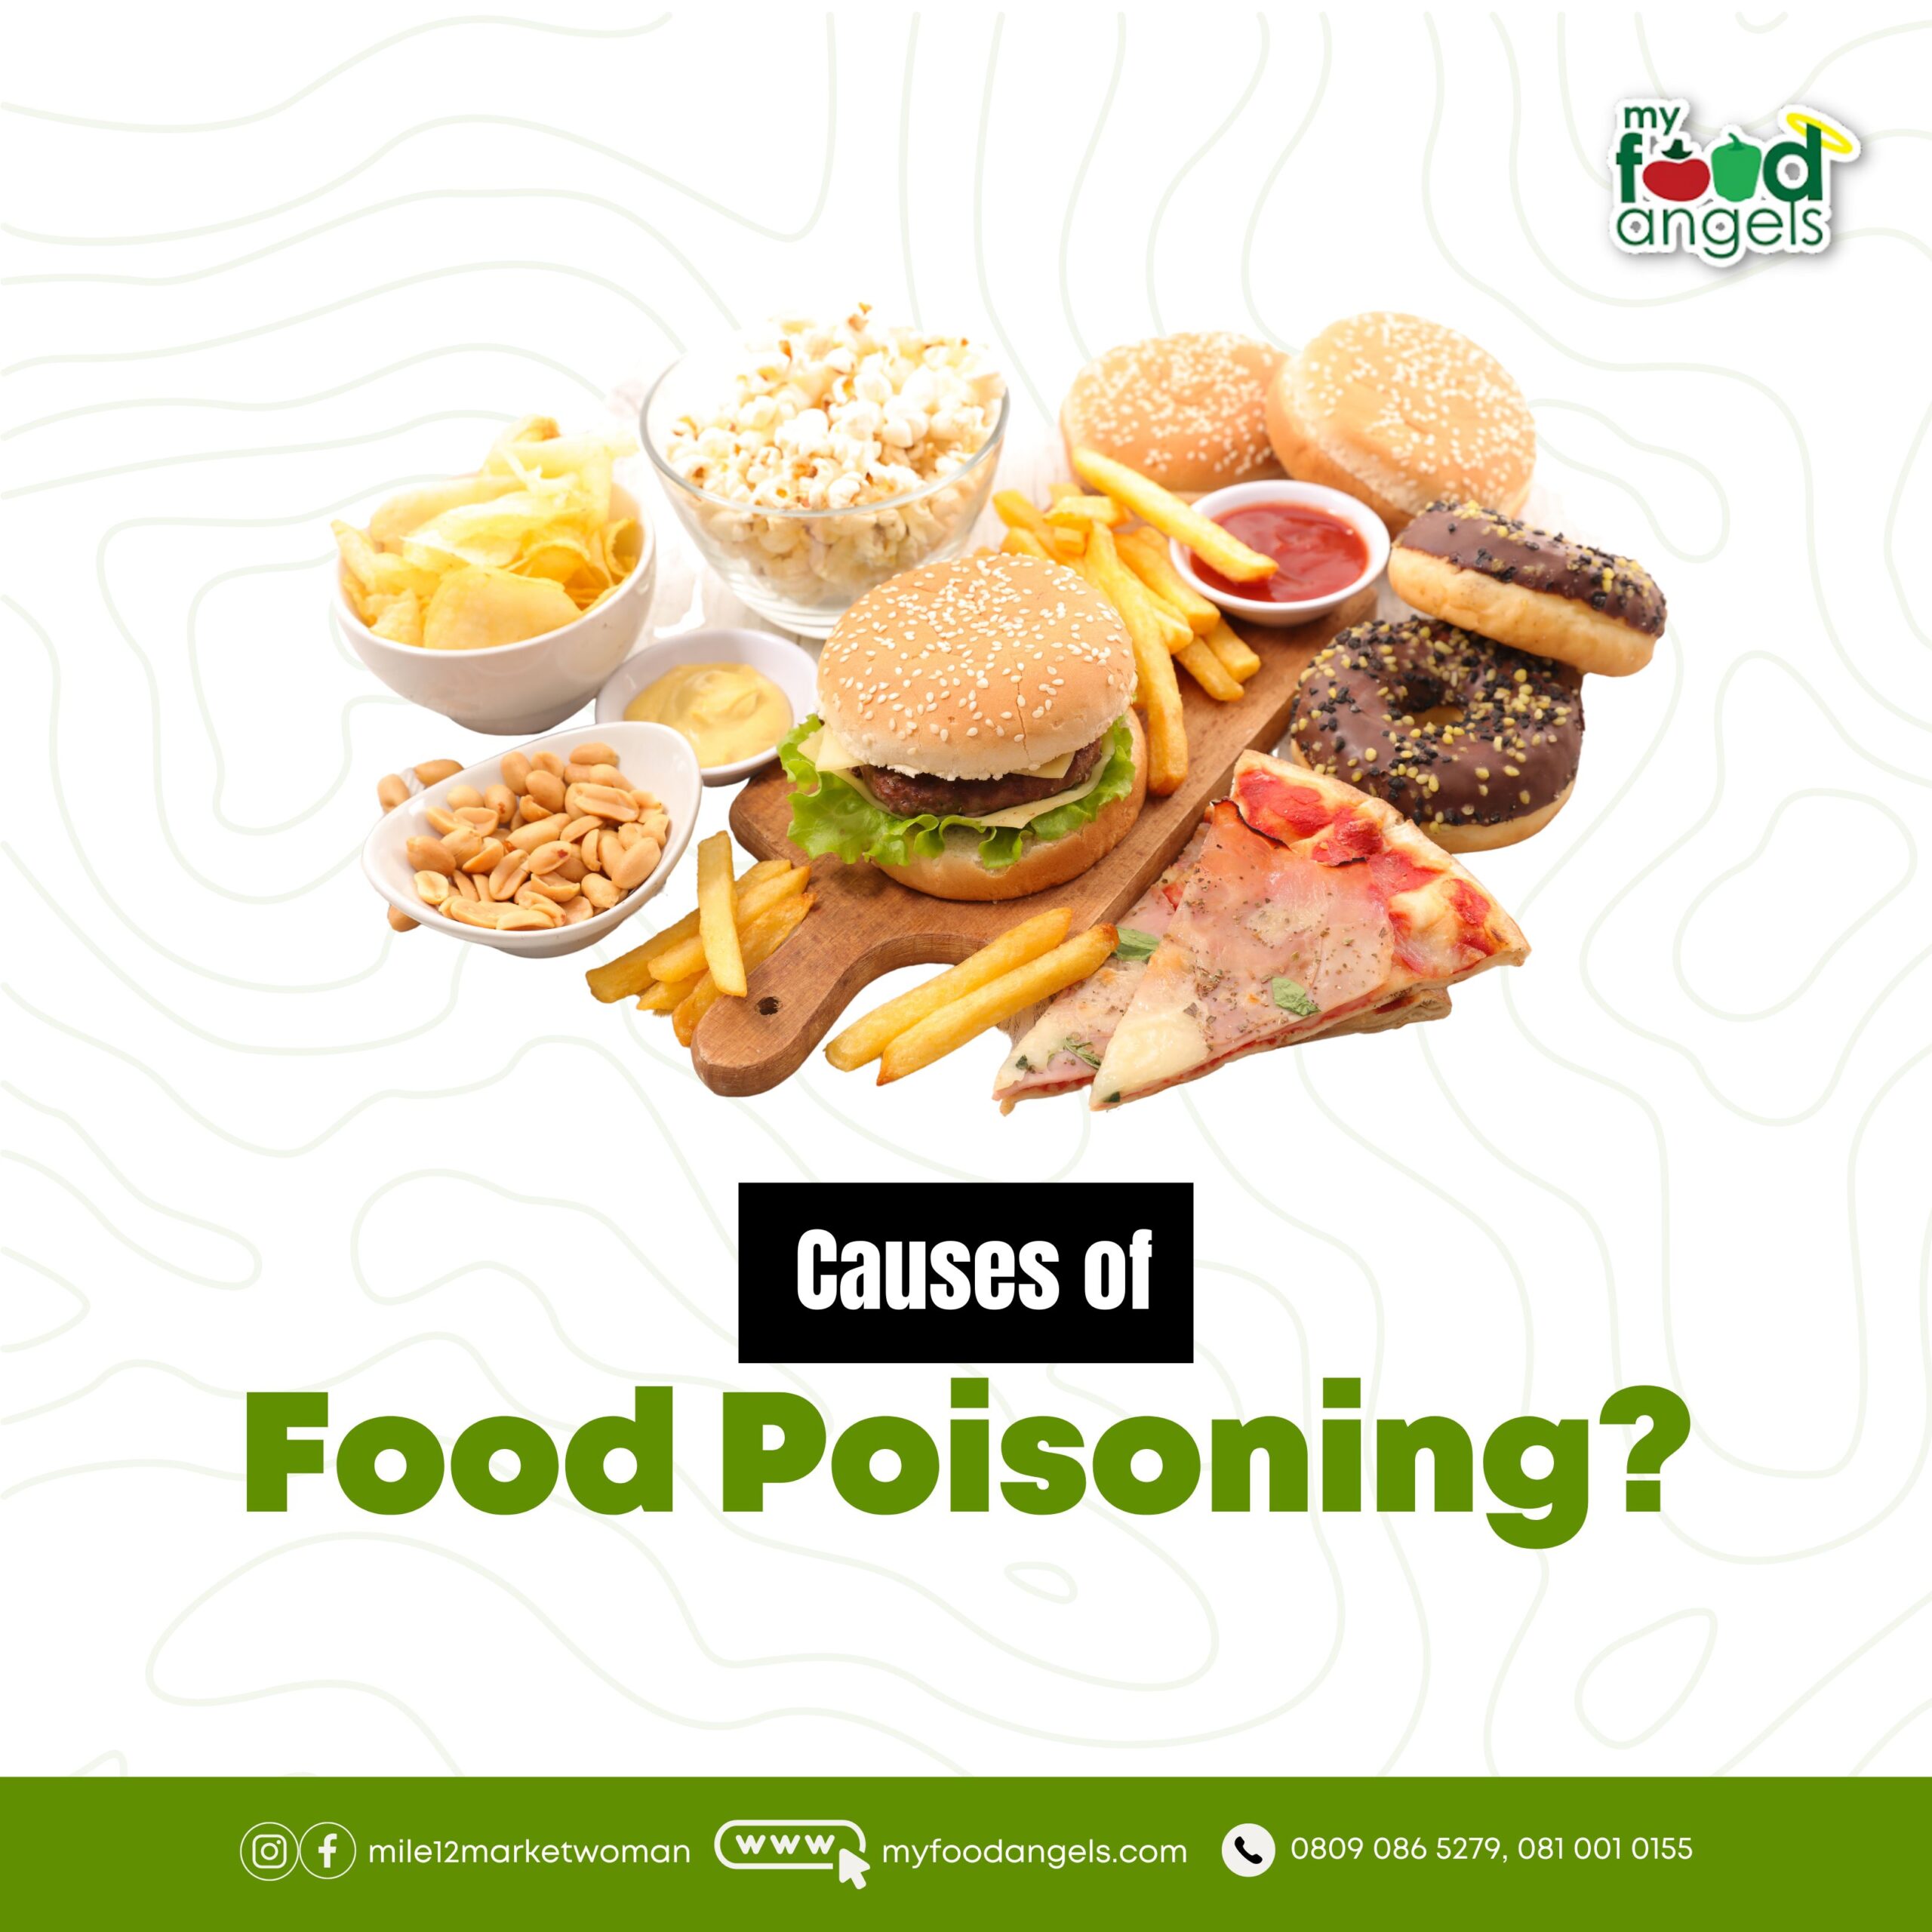 How to avoid food poisoning